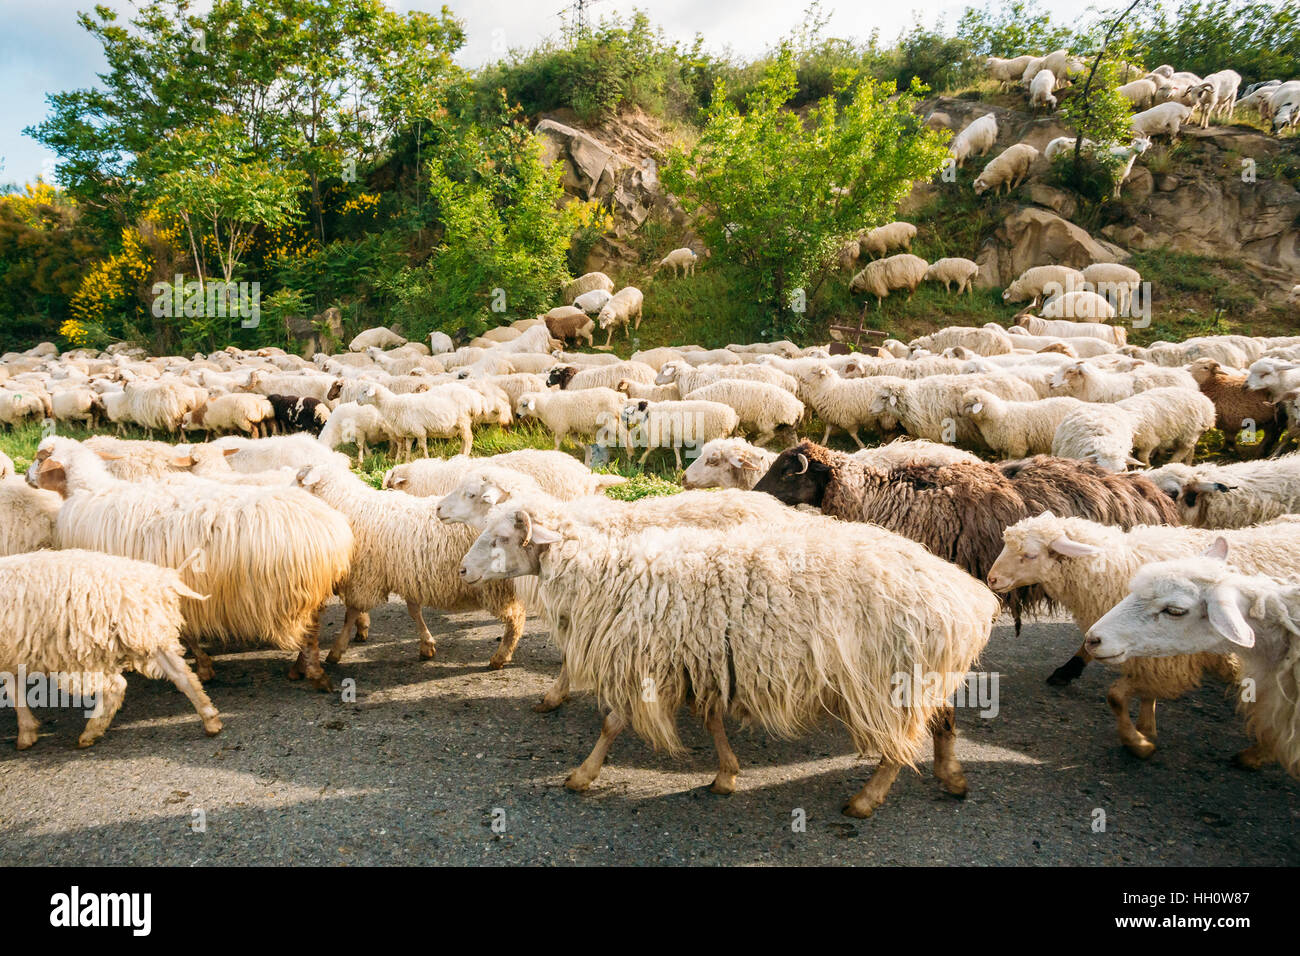 Georgia, Caucasus. The Flock Of Unshorn White Sheep Moving Along The Asphalt Road With The Shepherd In The Countryside. Stock Photo